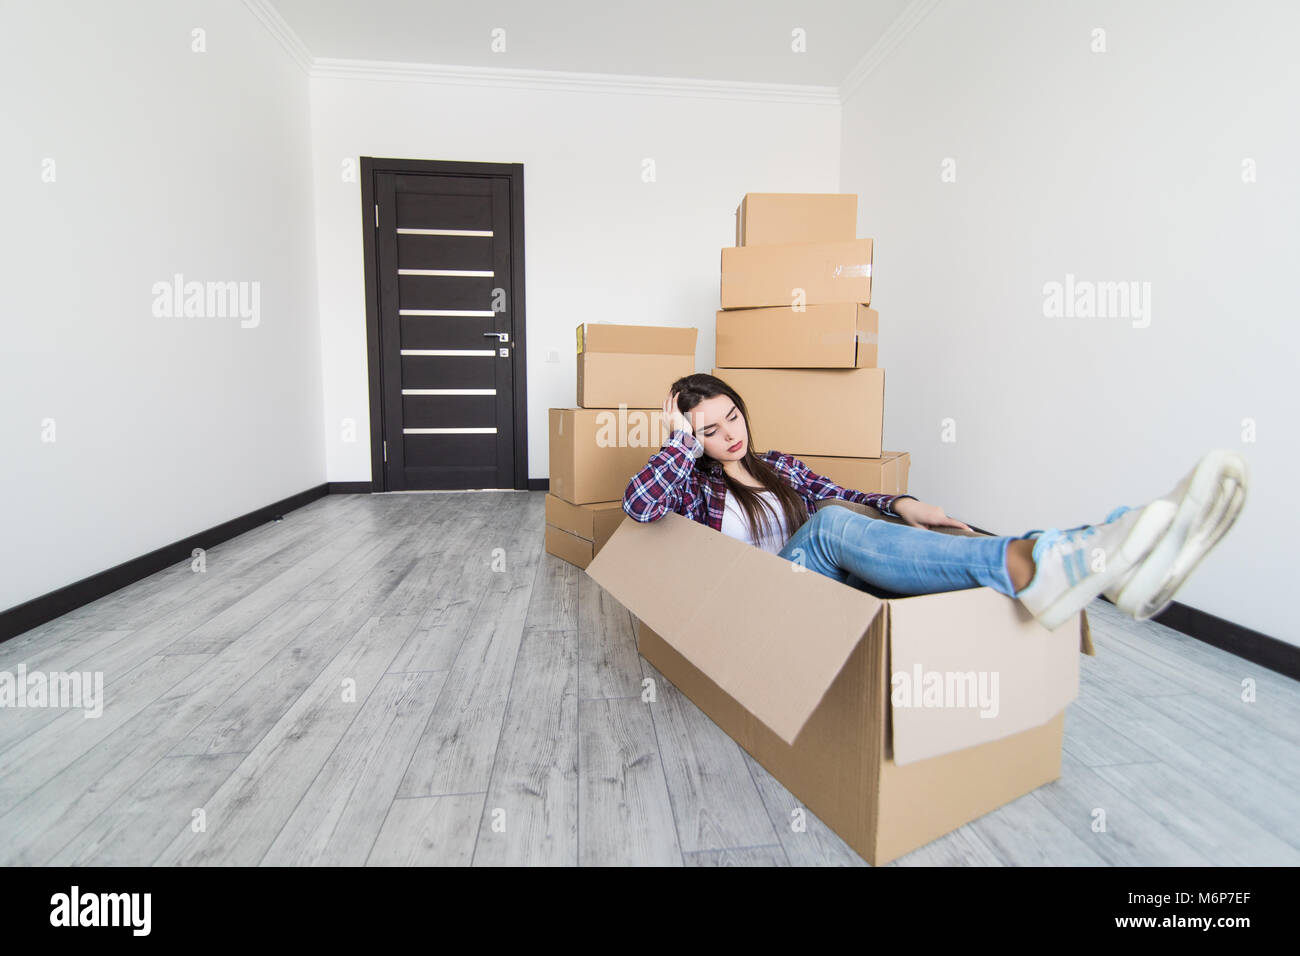 Cheerful woman sitting in a cardboard box Banque D'Images